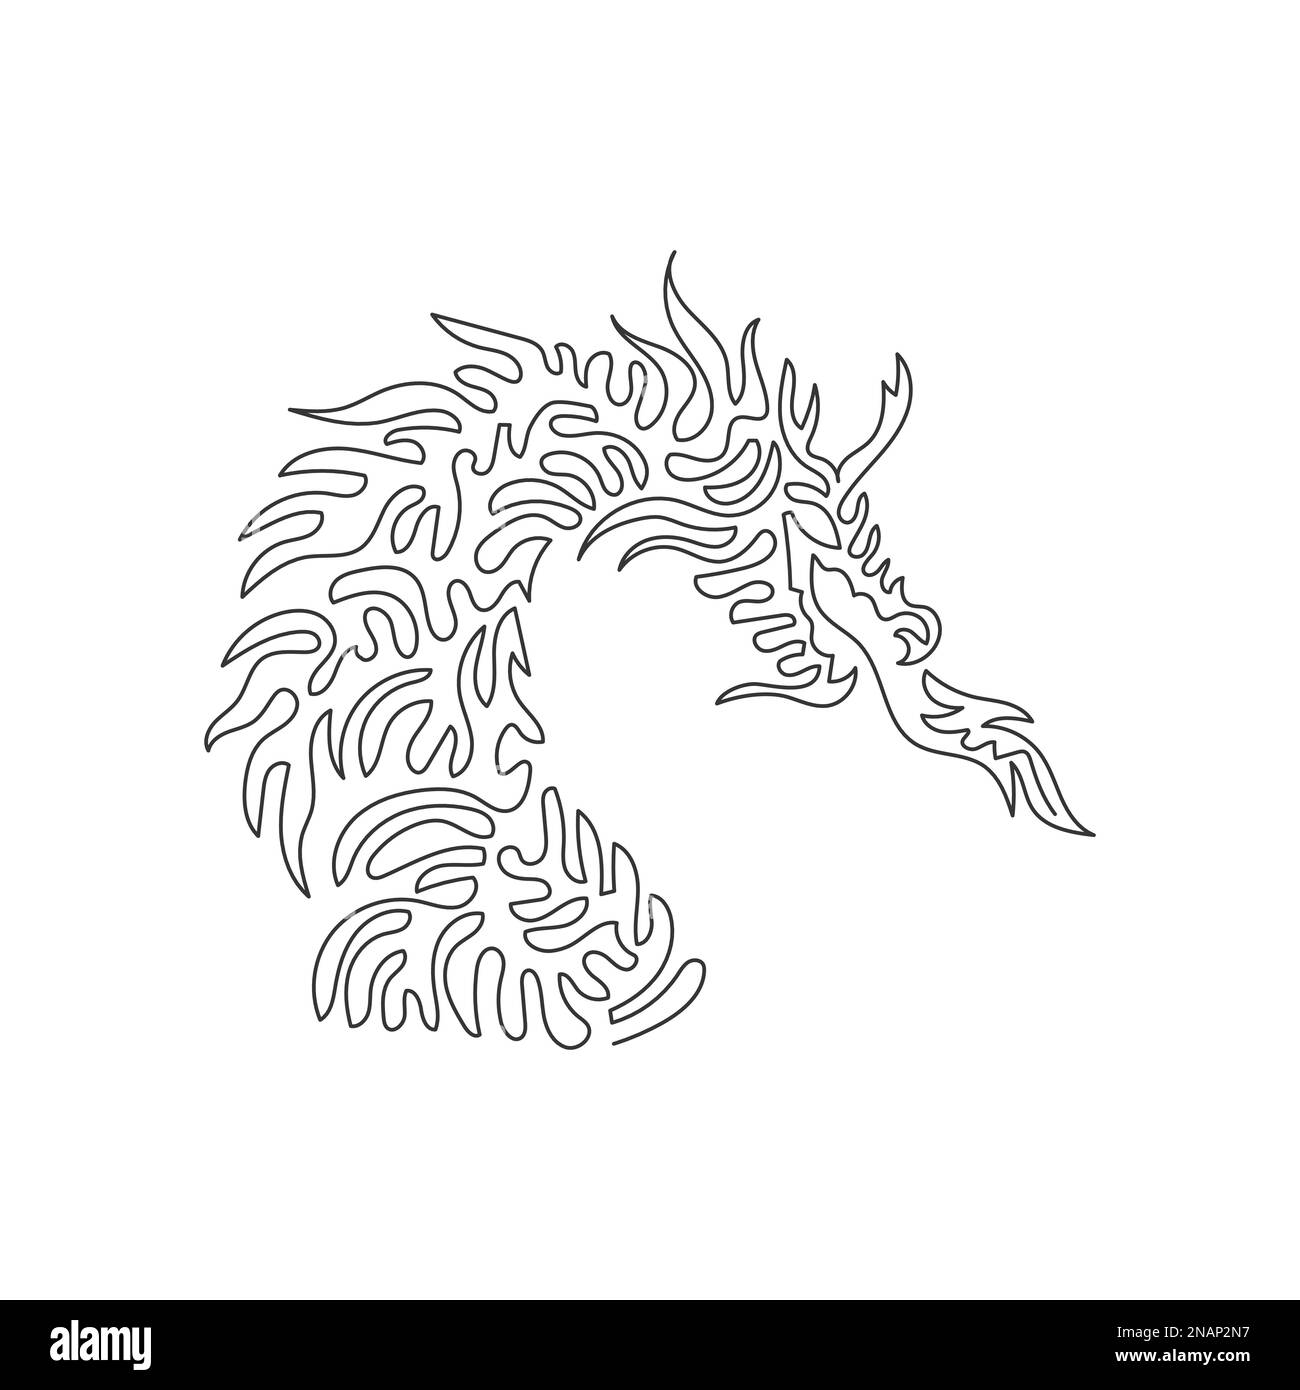 Continuous curve one line drawing of gruesome dragon curve abstract art. Single line editable stroke vector illustration of fire-breathing dragon Stock Vector